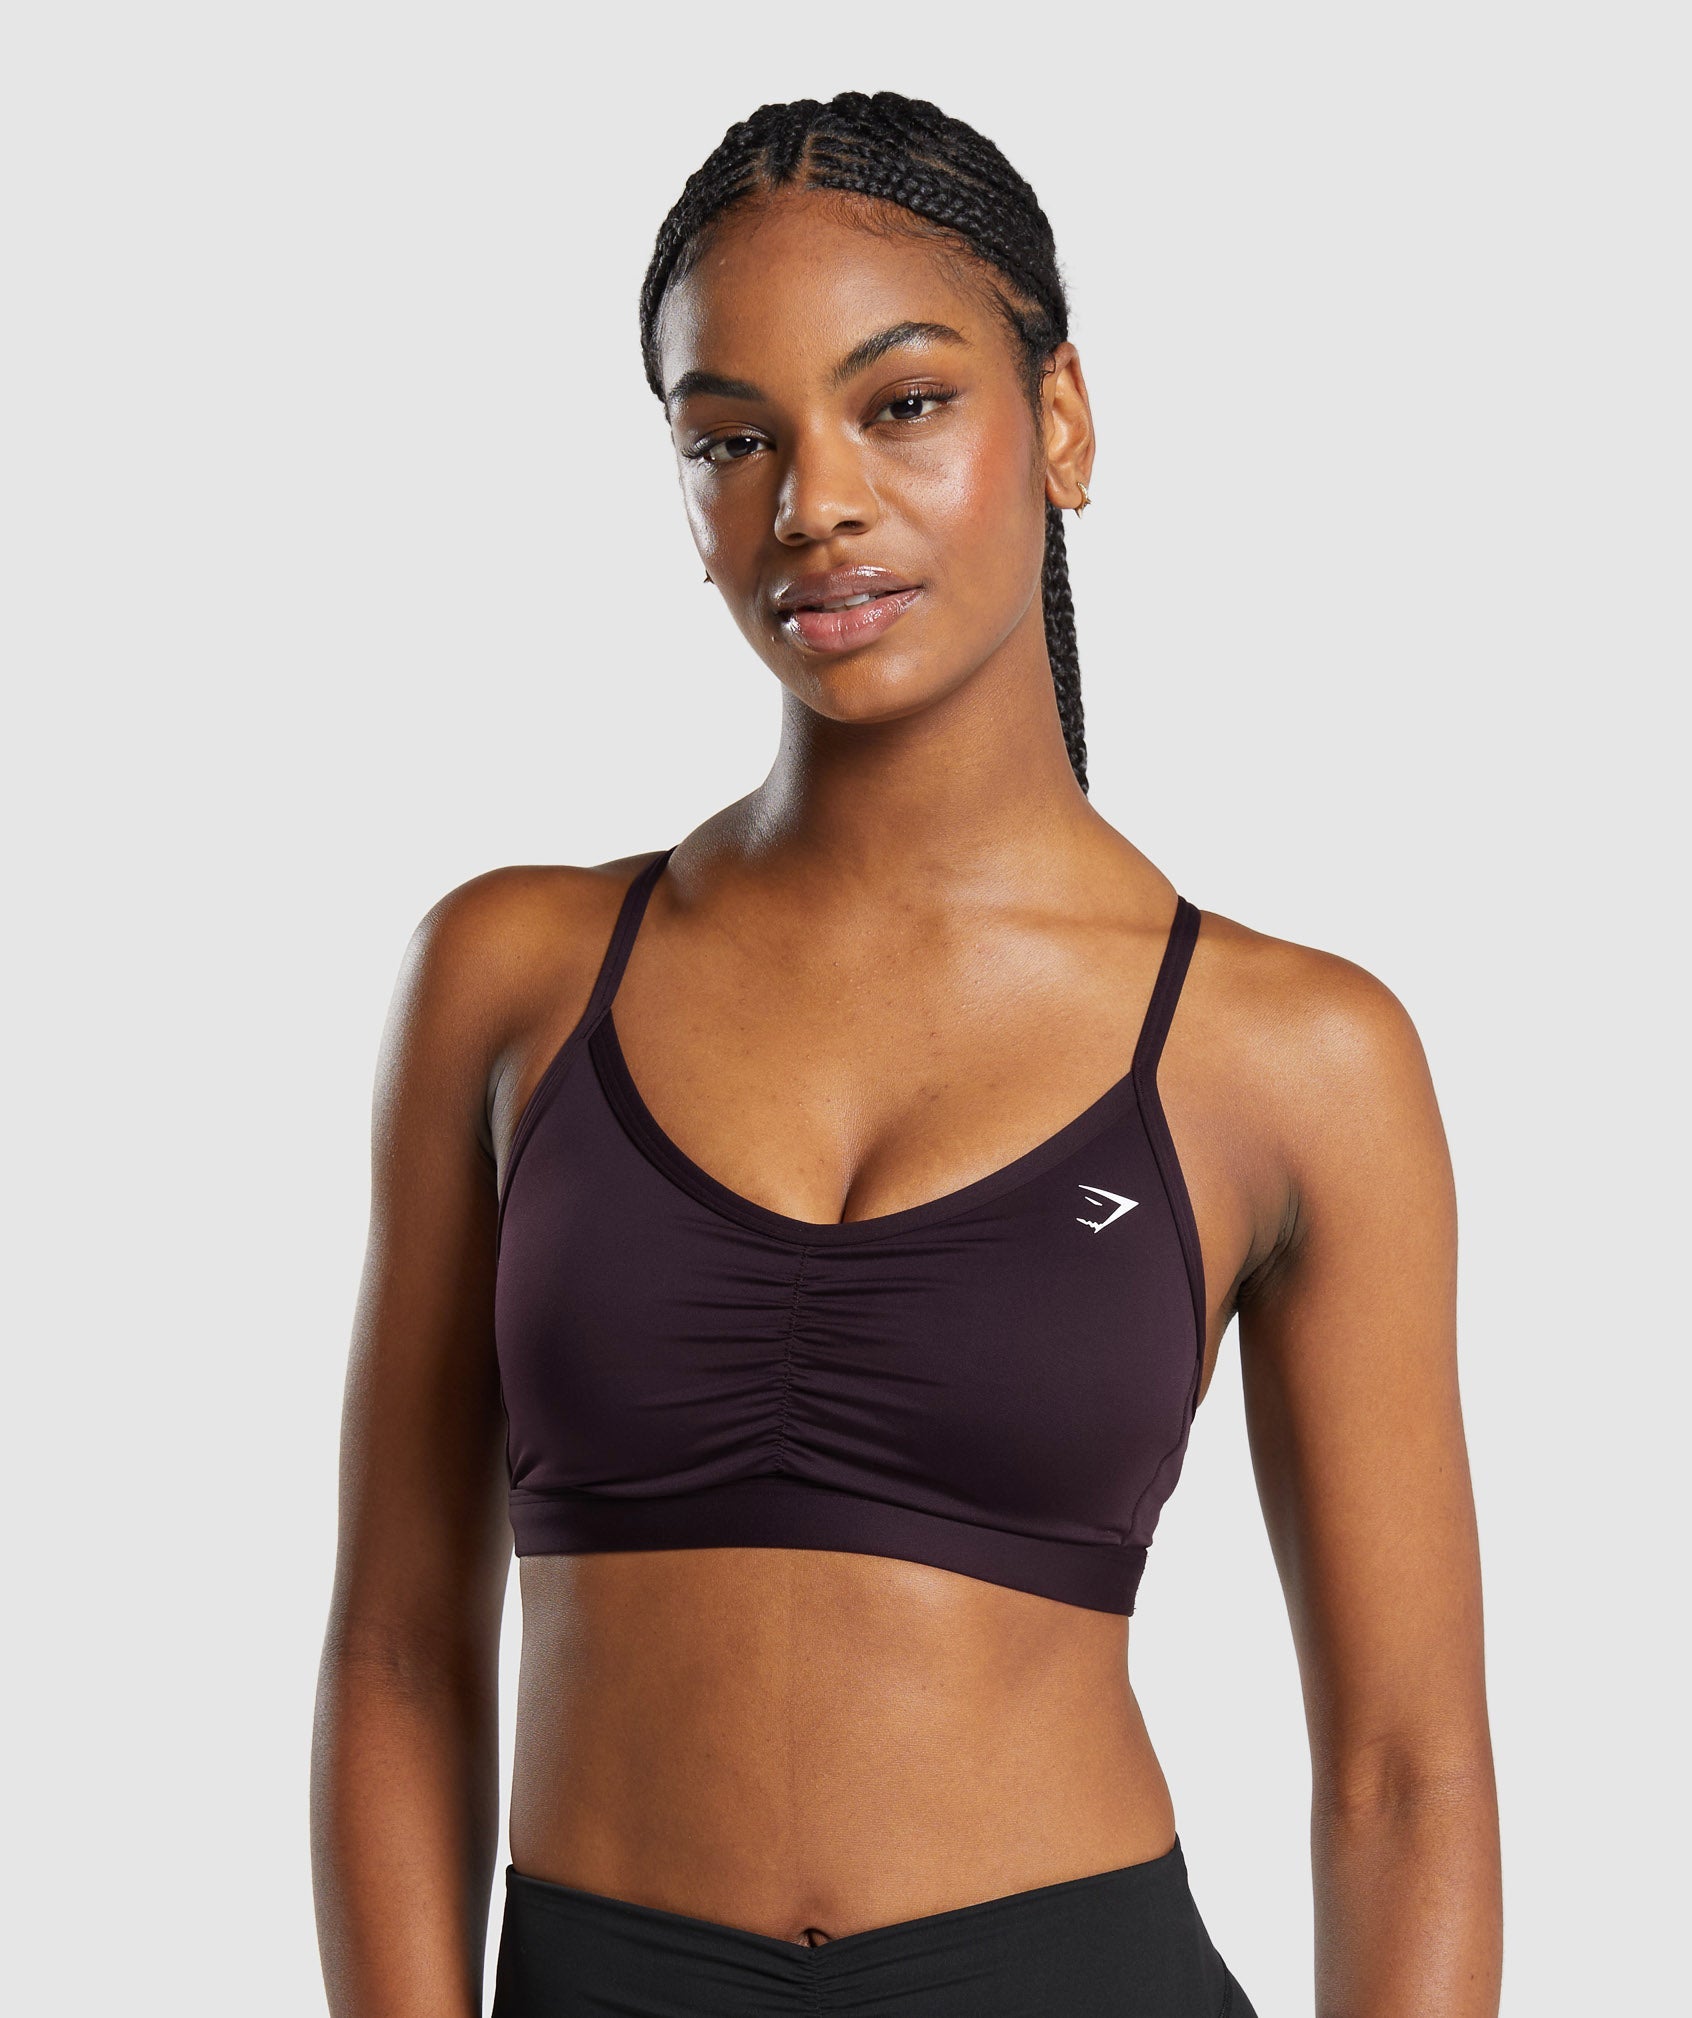 Your Sporting Must-Have - A Great-fitting Sports Bra - Run 4 Wales (R4W)